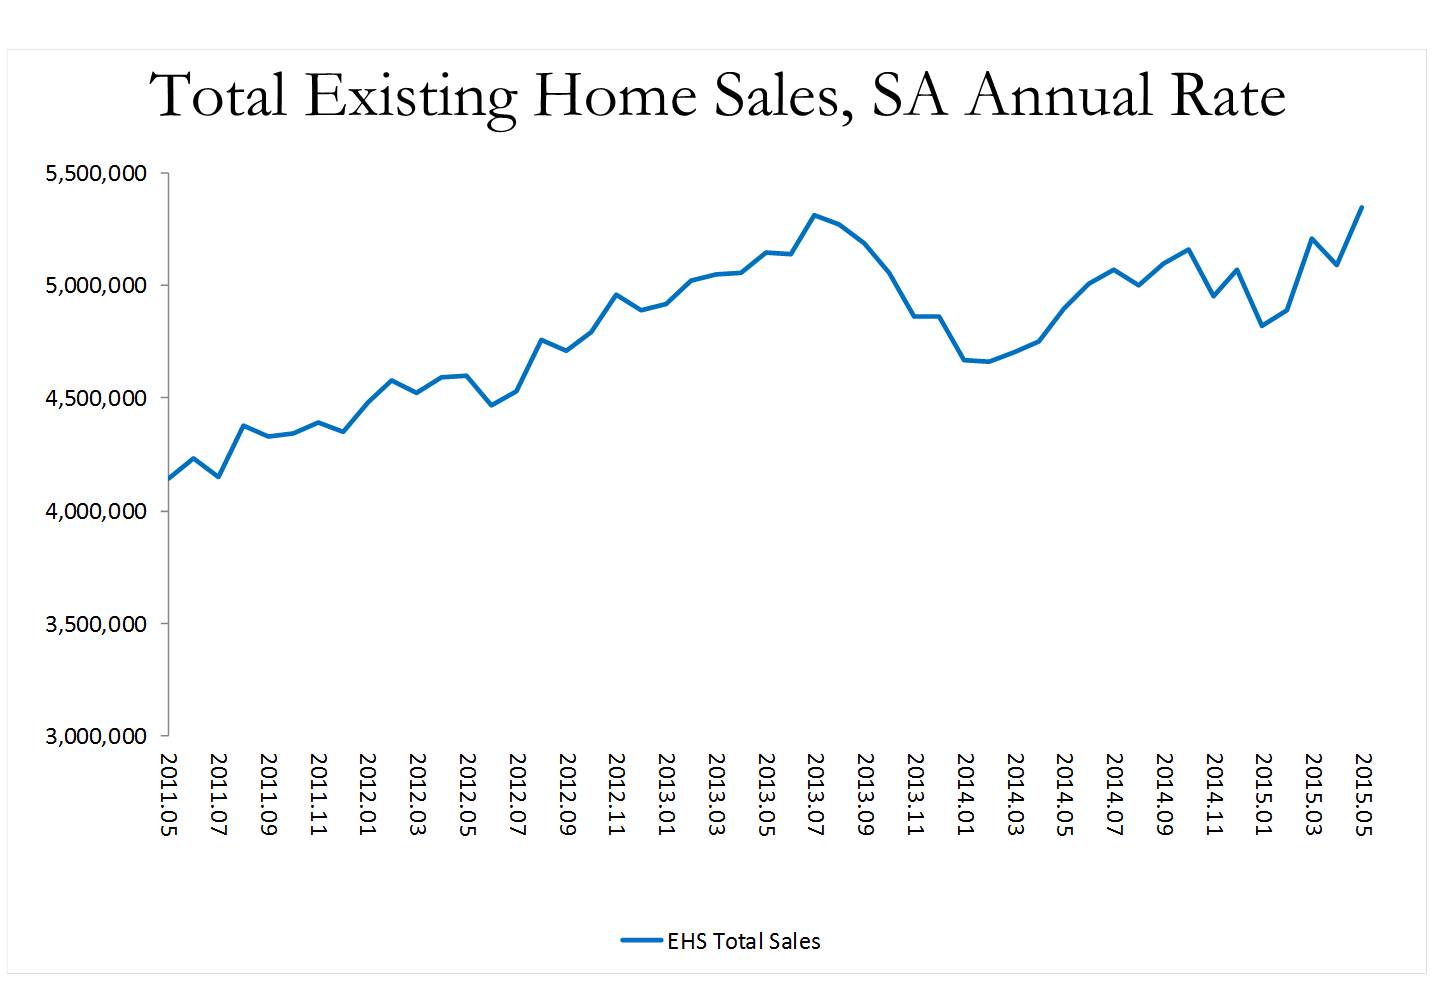 NRA Total Existing Home Sales